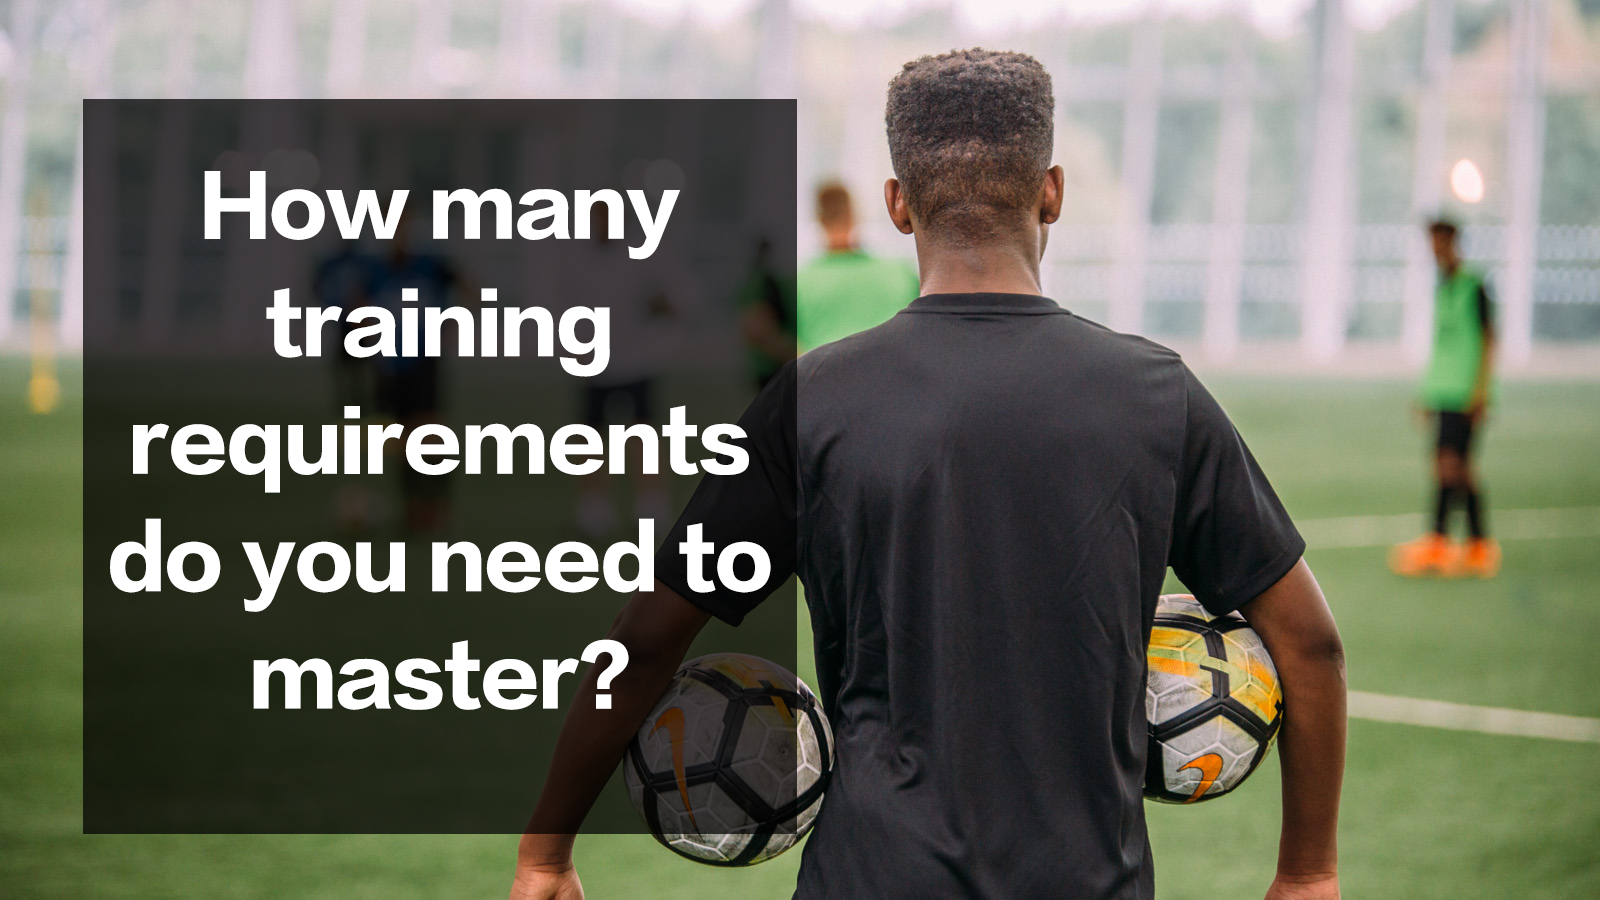 How many training requirements do you need to master?